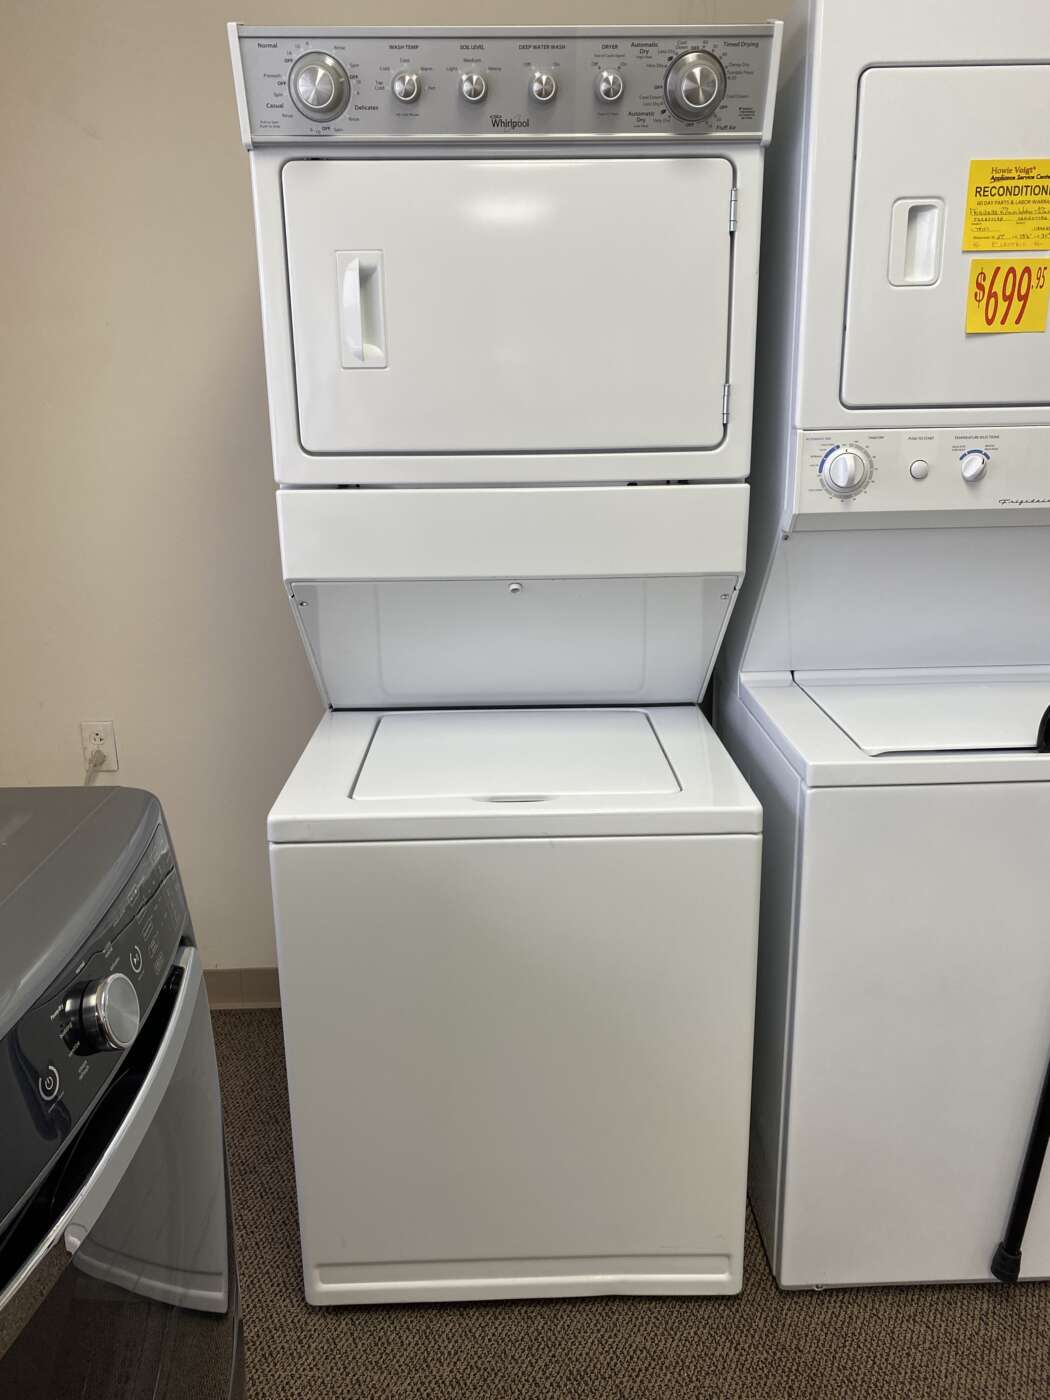 Reconditioned WHIRLPOOL 2.5 Cu. Ft. Top-Load Washer & 5.9 Cu. Ft. Electric Dryer – White